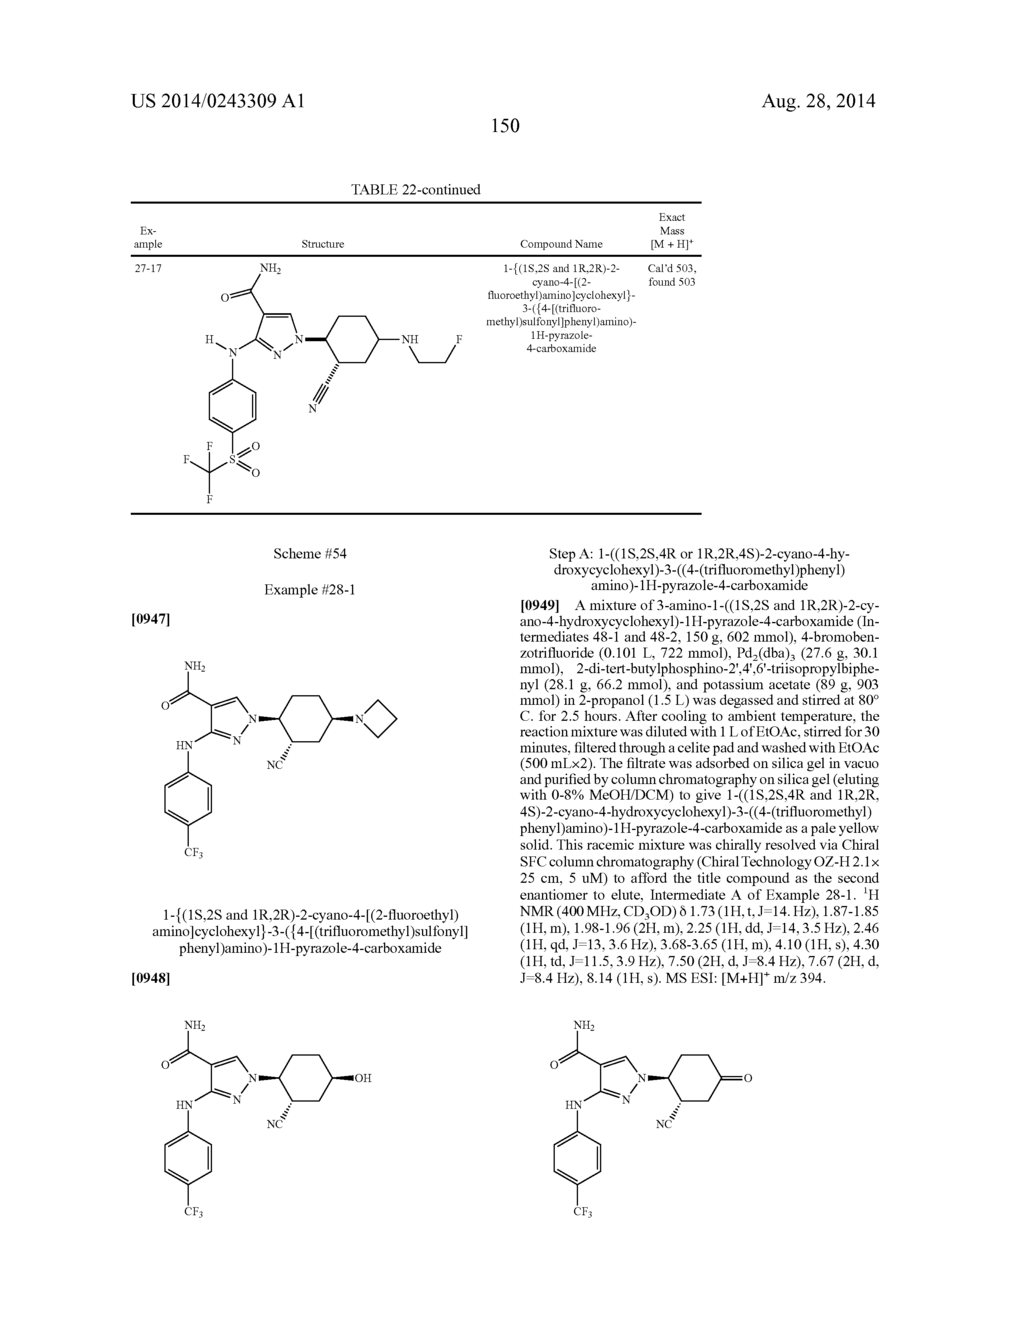 CYCLOALKYLNITRILE PYRAZOLE CARBOXAMIDES AS JANUS KINASE INHIBITORS - diagram, schematic, and image 151